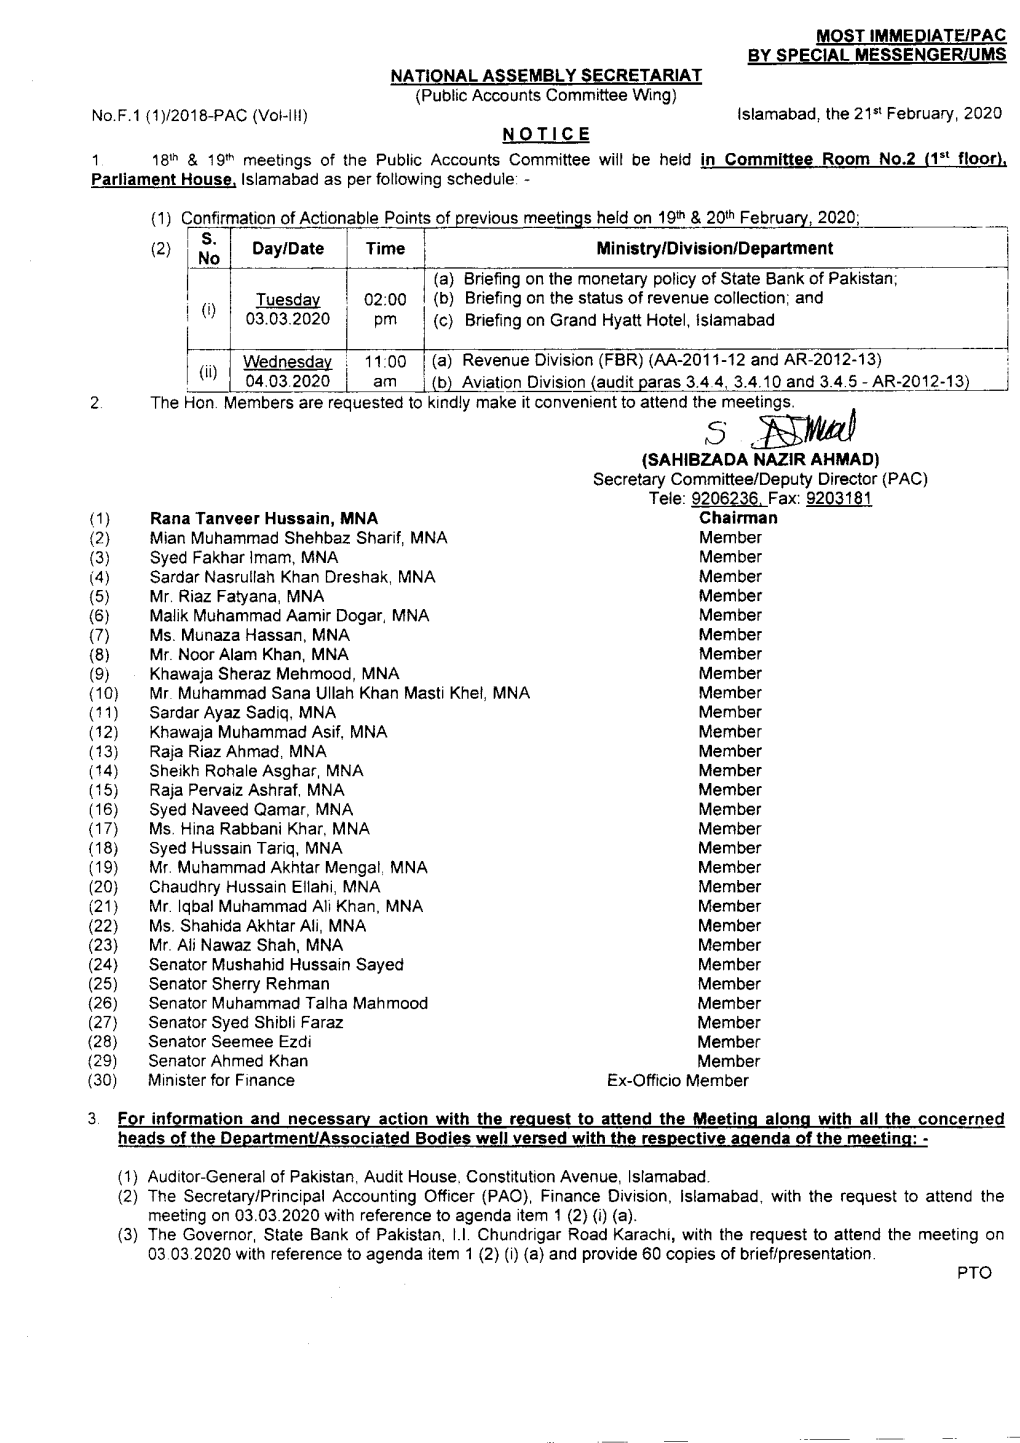 NOTICE 1 18Rh & 1 9Rh Meetings of the Public Accounts Committee Will Be Held M No.Z 1"T F Parliament House